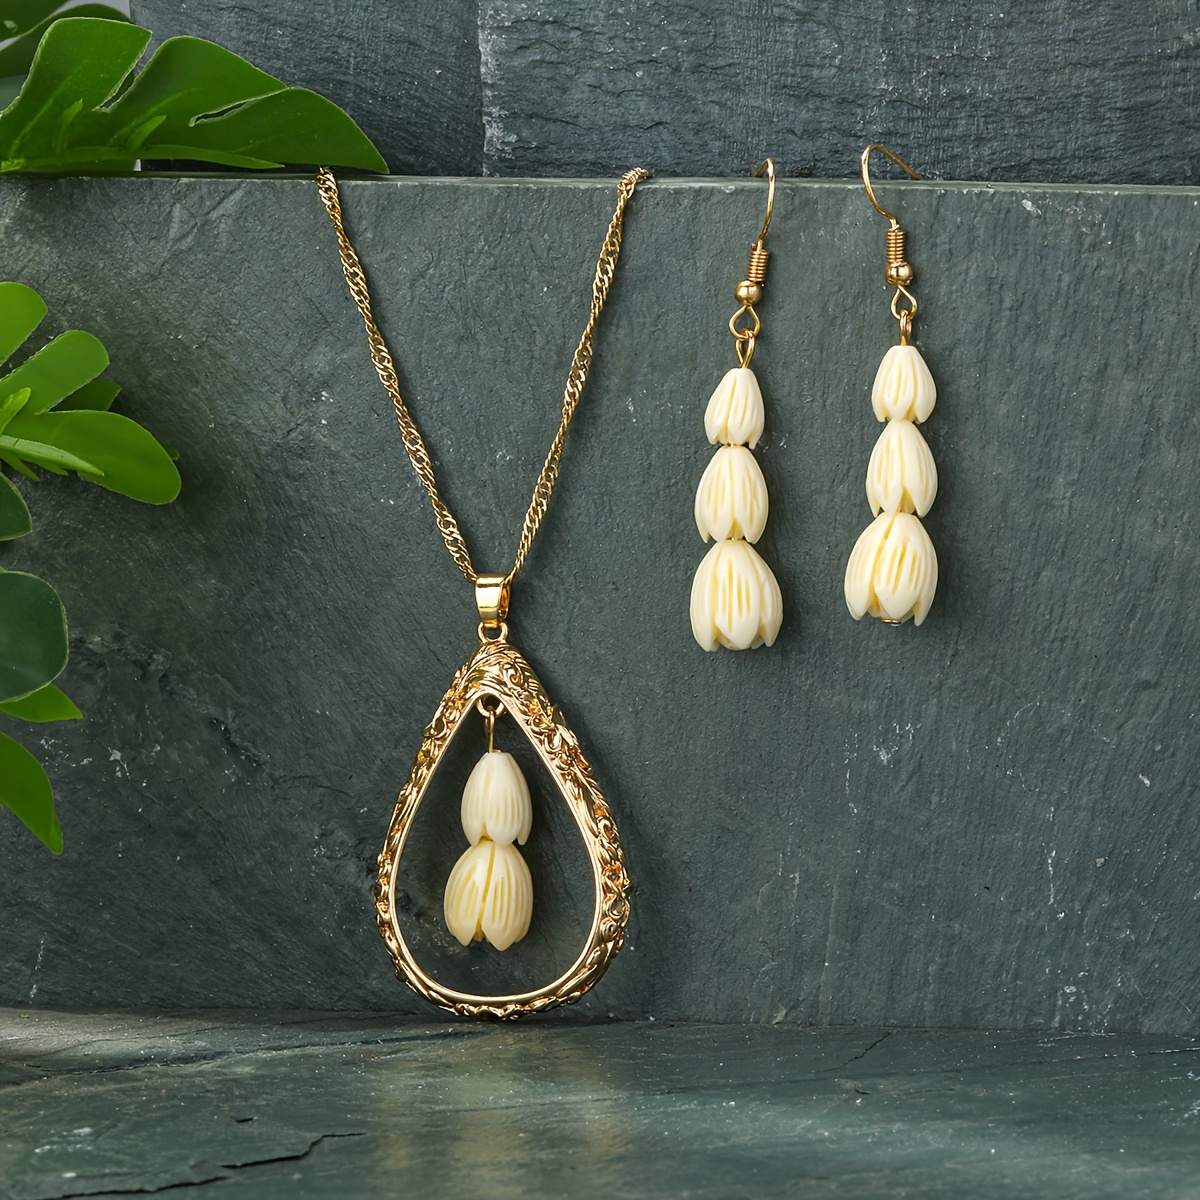 

Hawaiian-inspired Electroplated Resin Jasmine Floral Pendant And Earrings Set - Ideal For Daily Use & Valentine's Day Gift